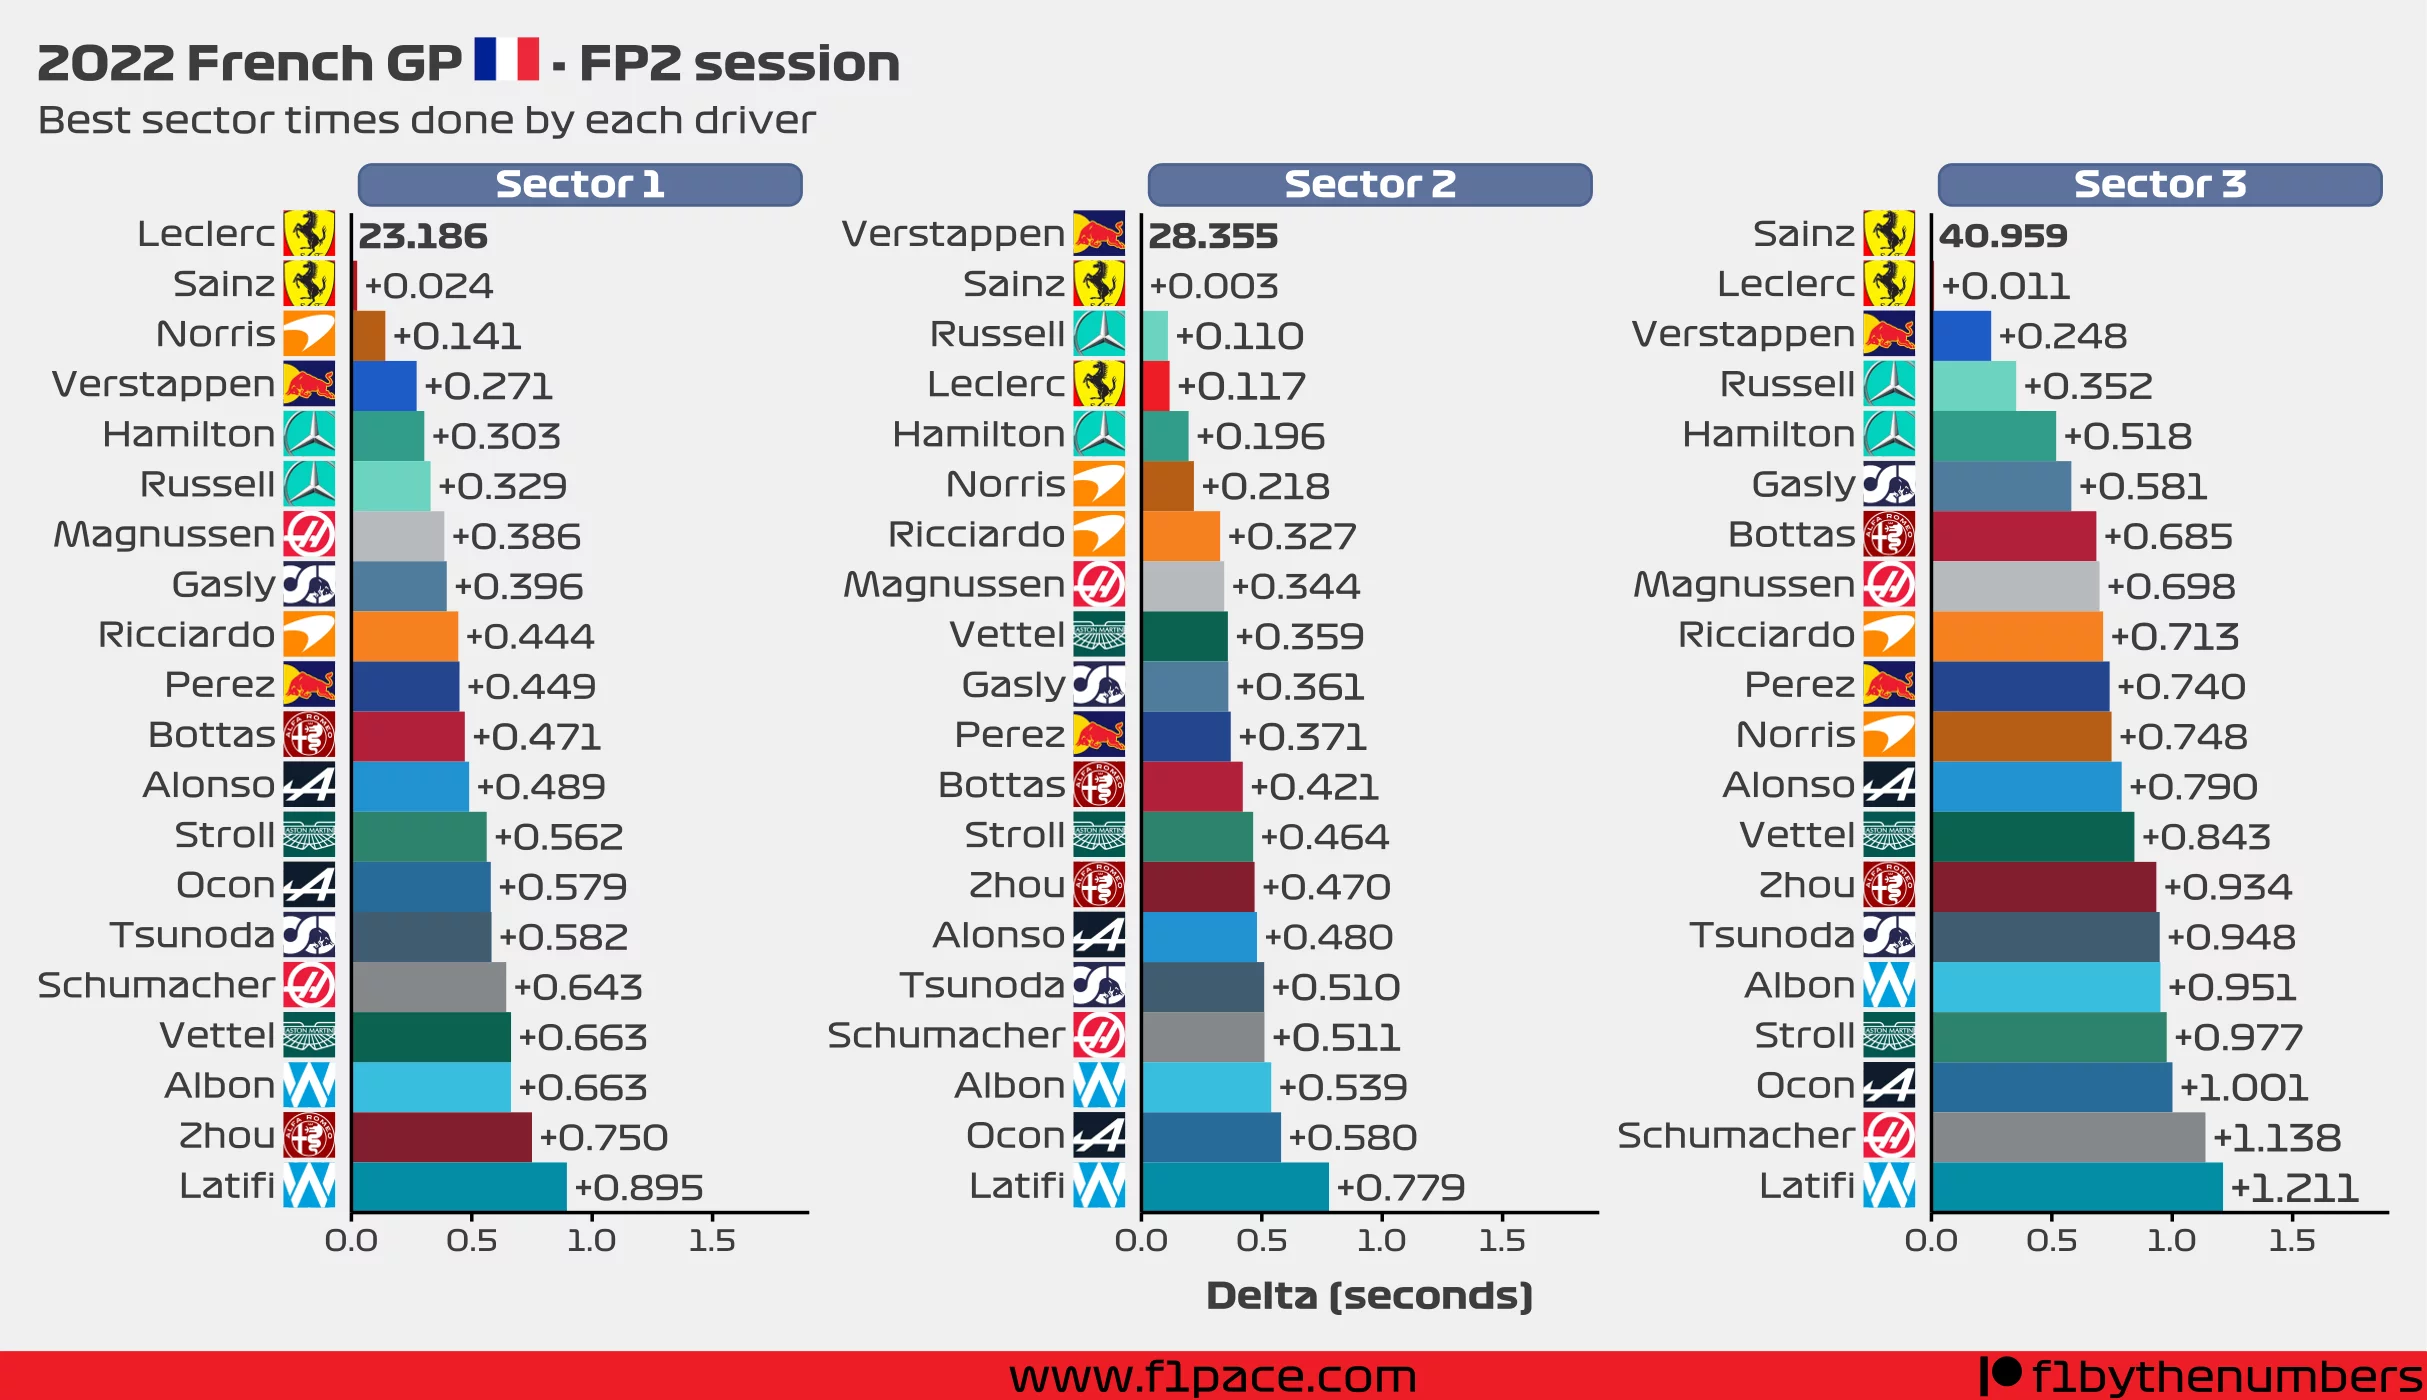 Best sector times for each driver